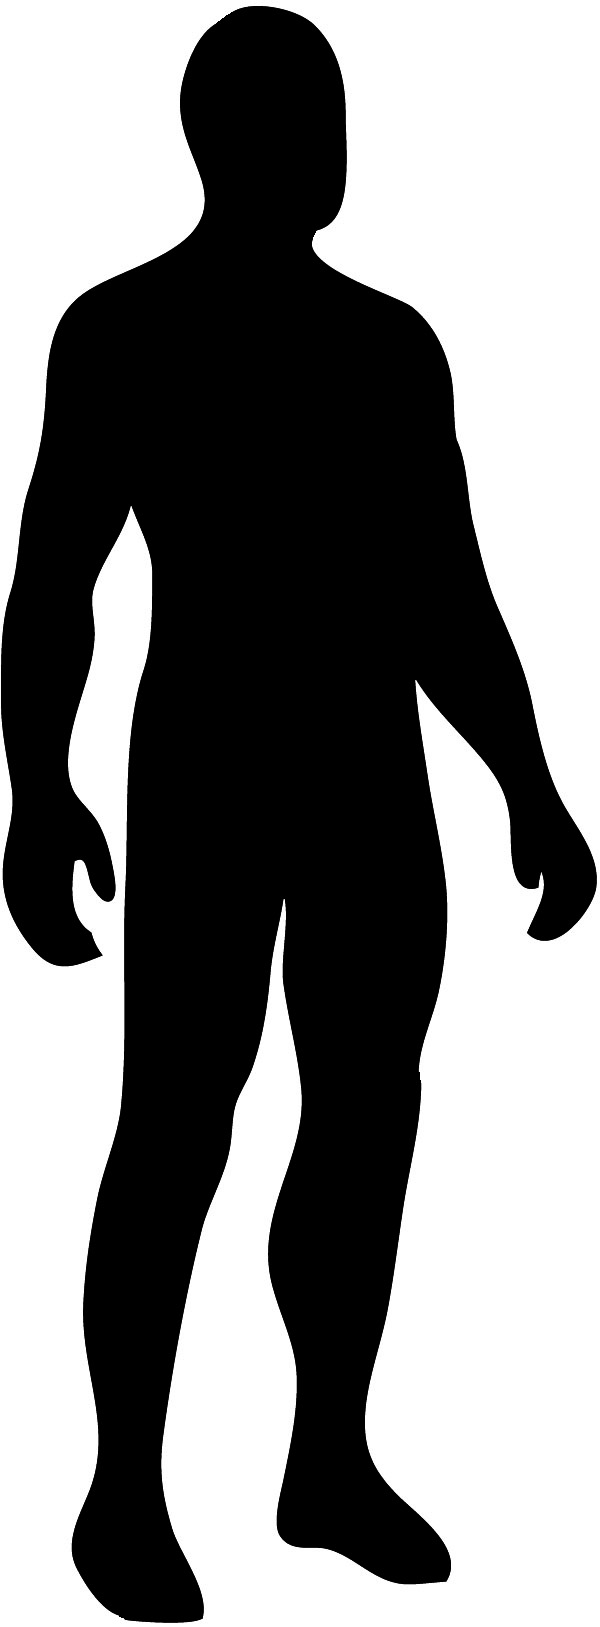 Human Silhouette | Free Download Clip Art | Free Clip Art | on ...